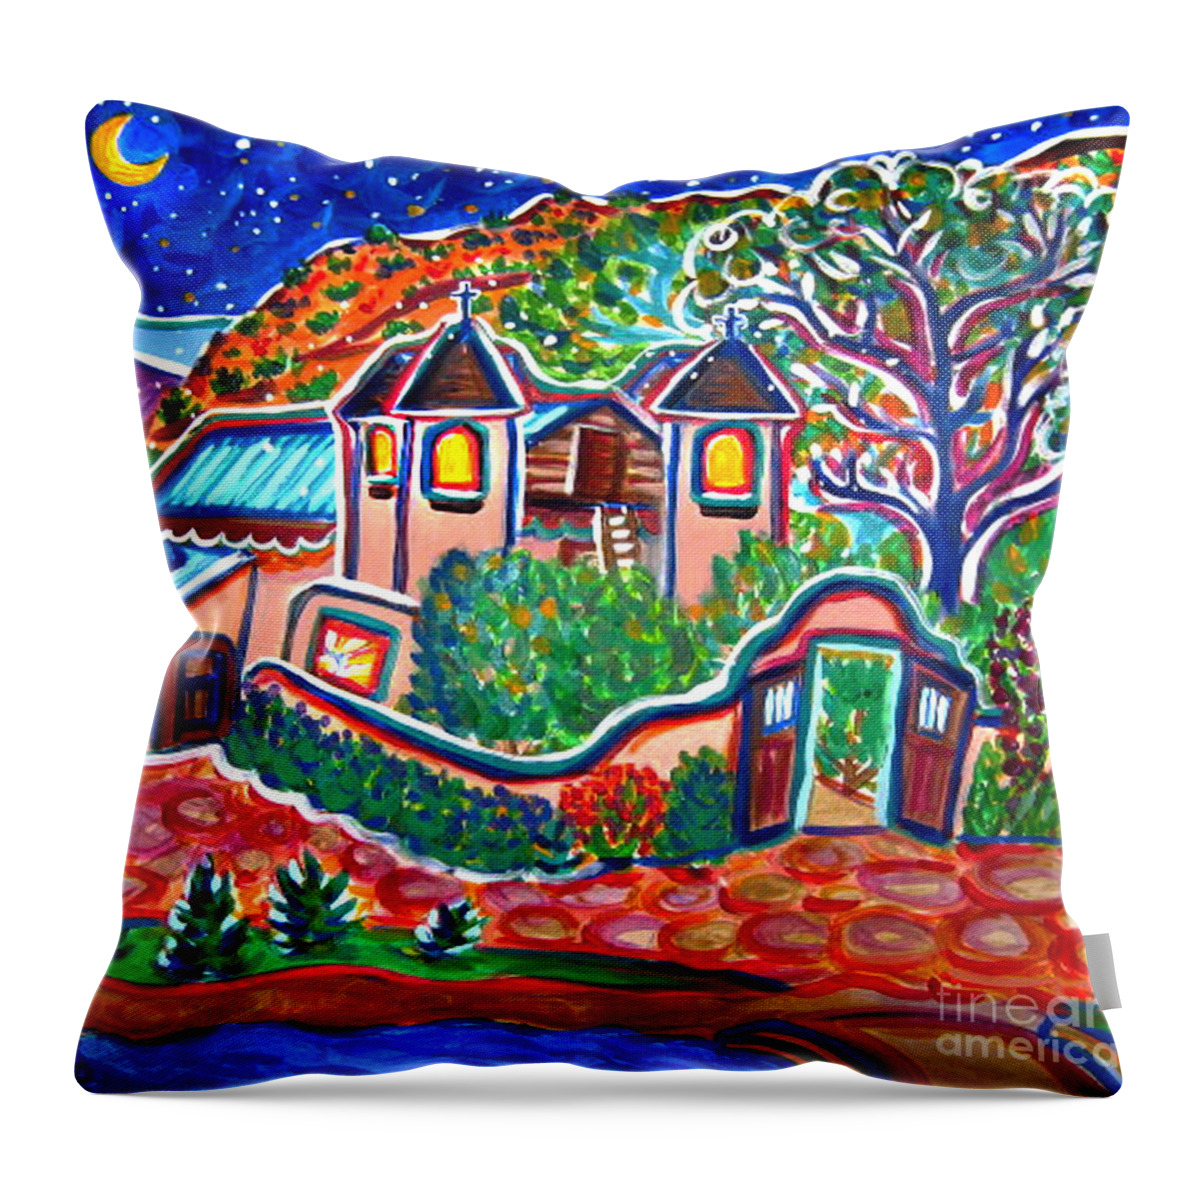 Colorful Art Throw Pillow featuring the painting Chimayo Nightscape by Rachel Houseman